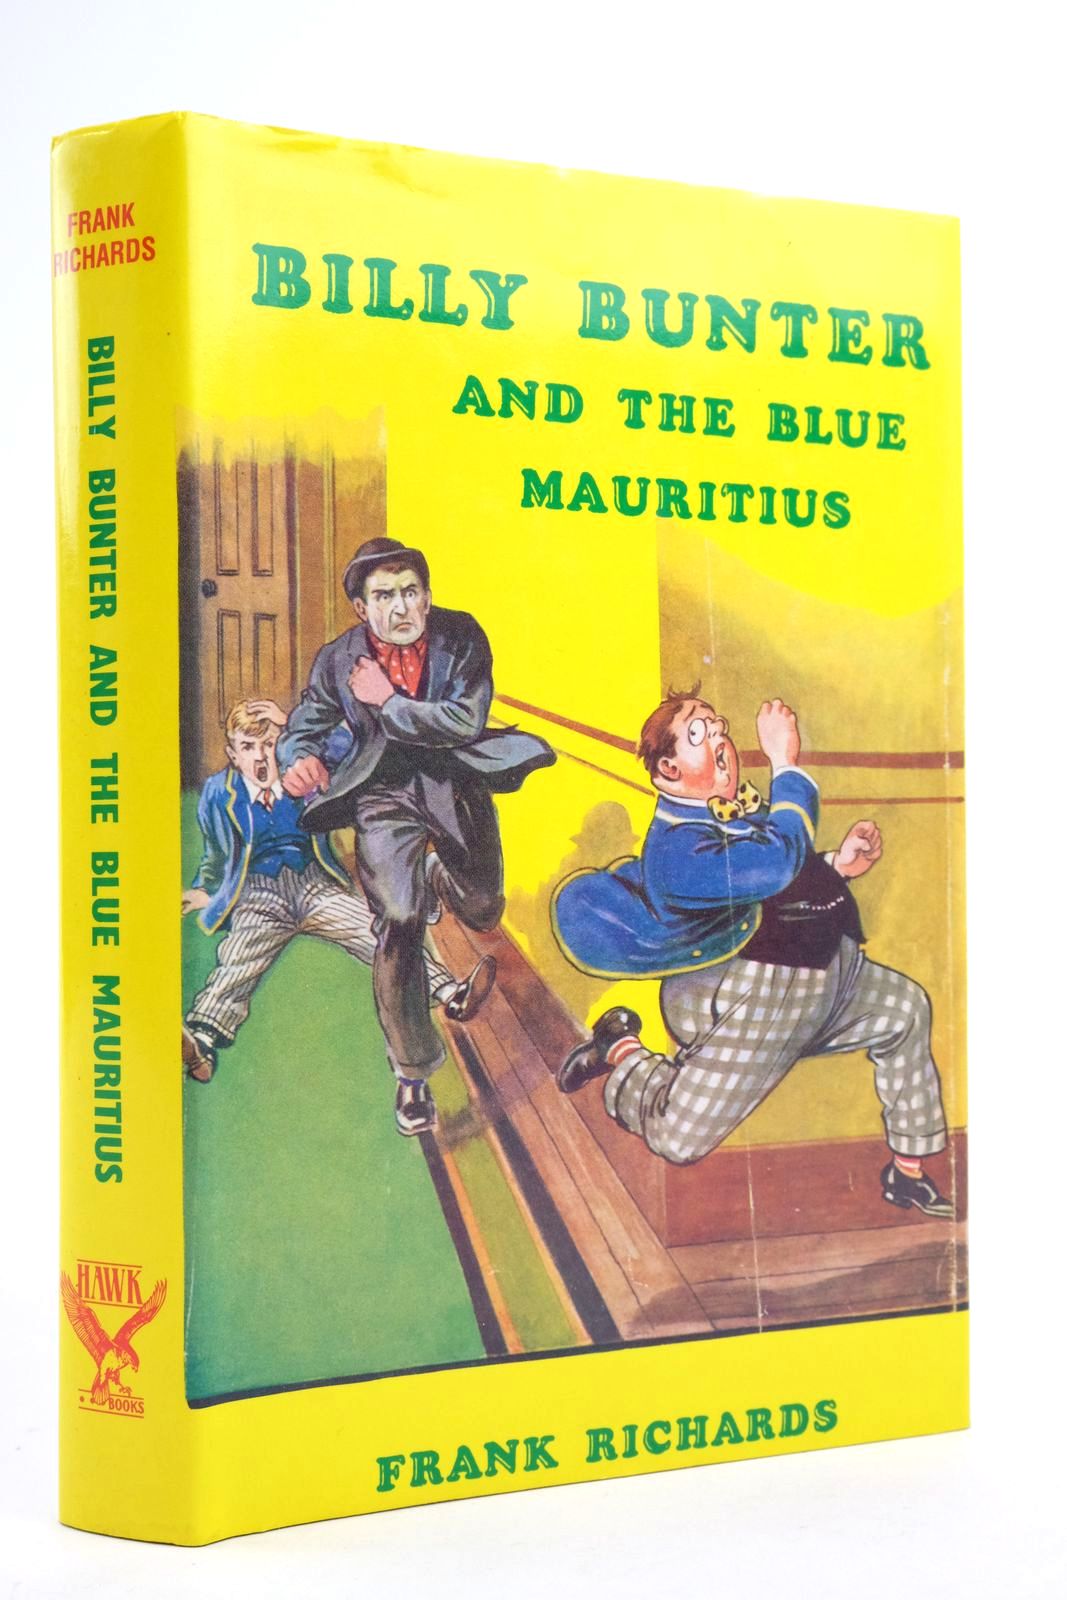 Photo of BILLY BUNTER AND THE BLUE MAURITIUS written by Richards, Frank illustrated by Macdonald, R.J. published by Hawk Books Ltd. (STOCK CODE: 2136150)  for sale by Stella & Rose's Books